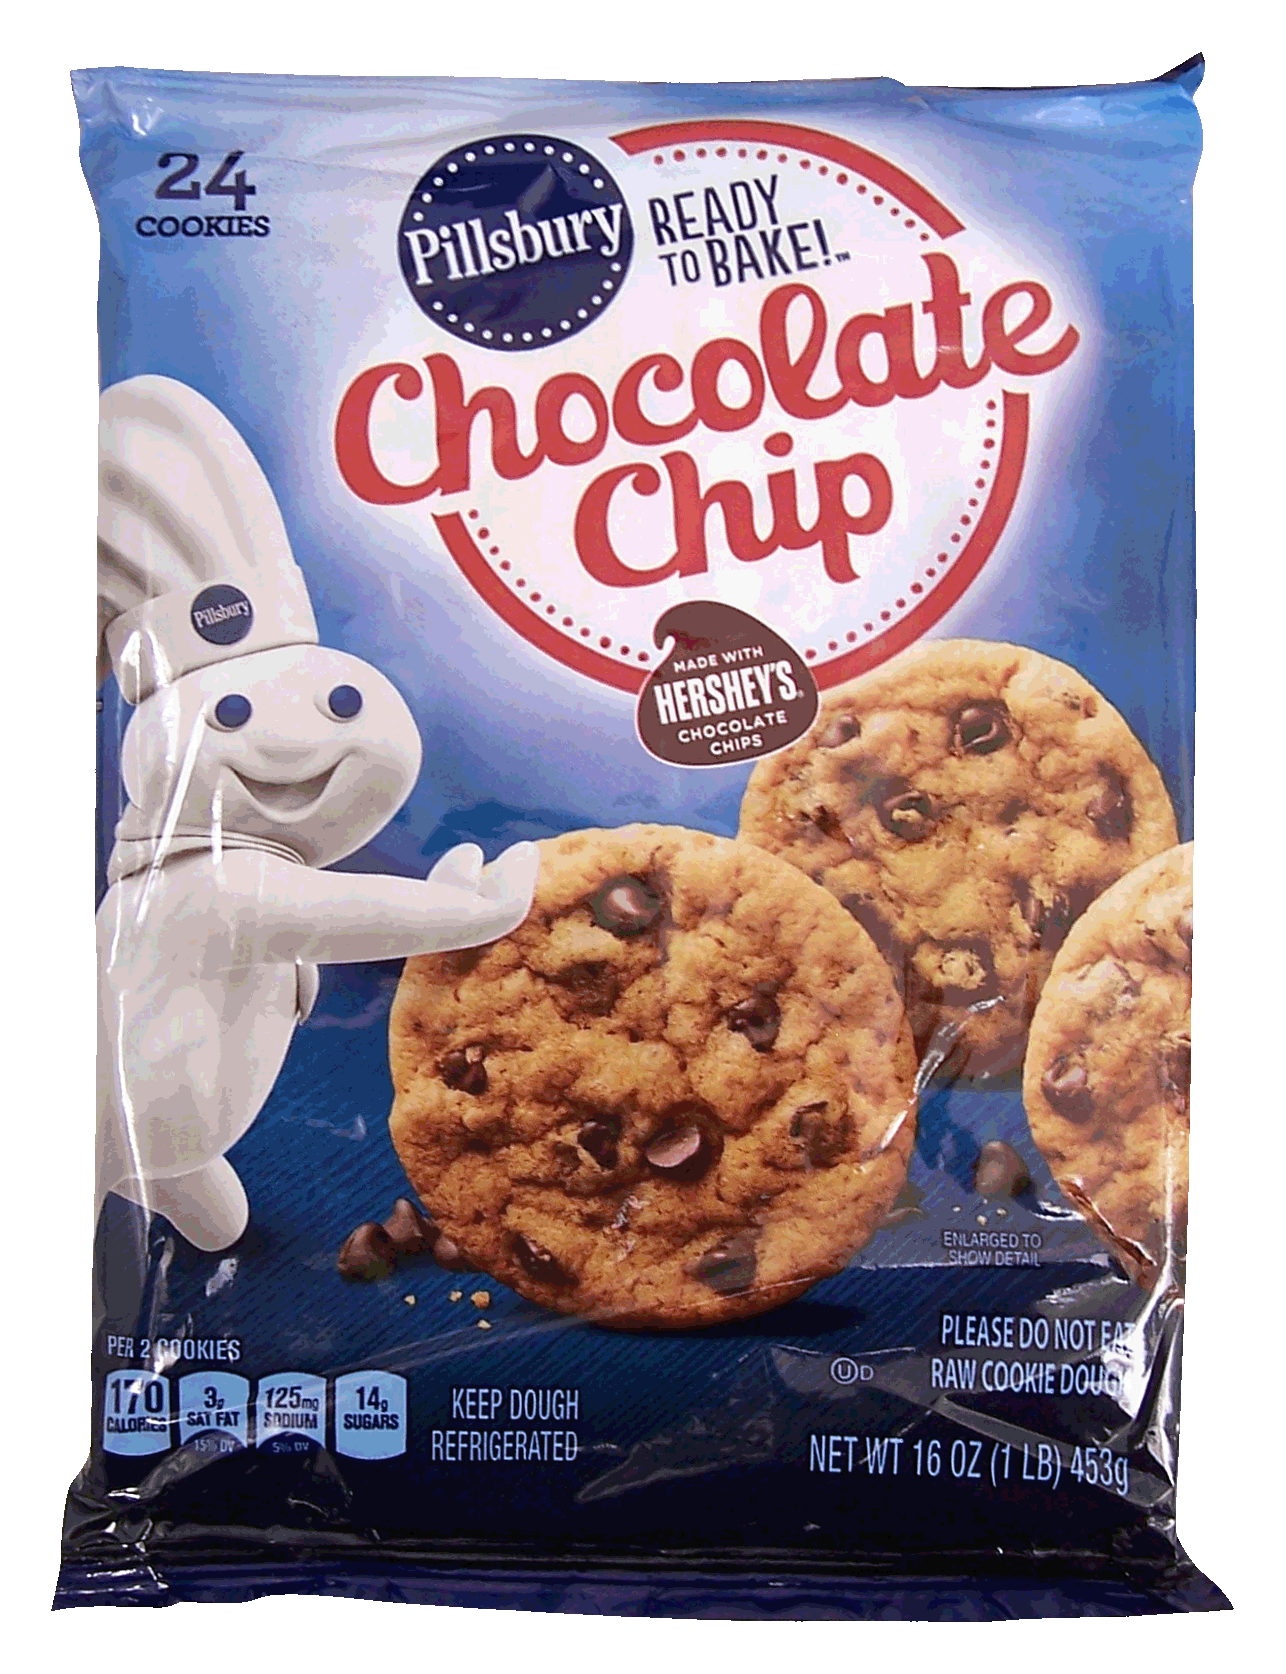 Pillsbury Ready To Bake! chocolate chip with Hershey's cookie dough, makes 24 cookies Full-Size Picture